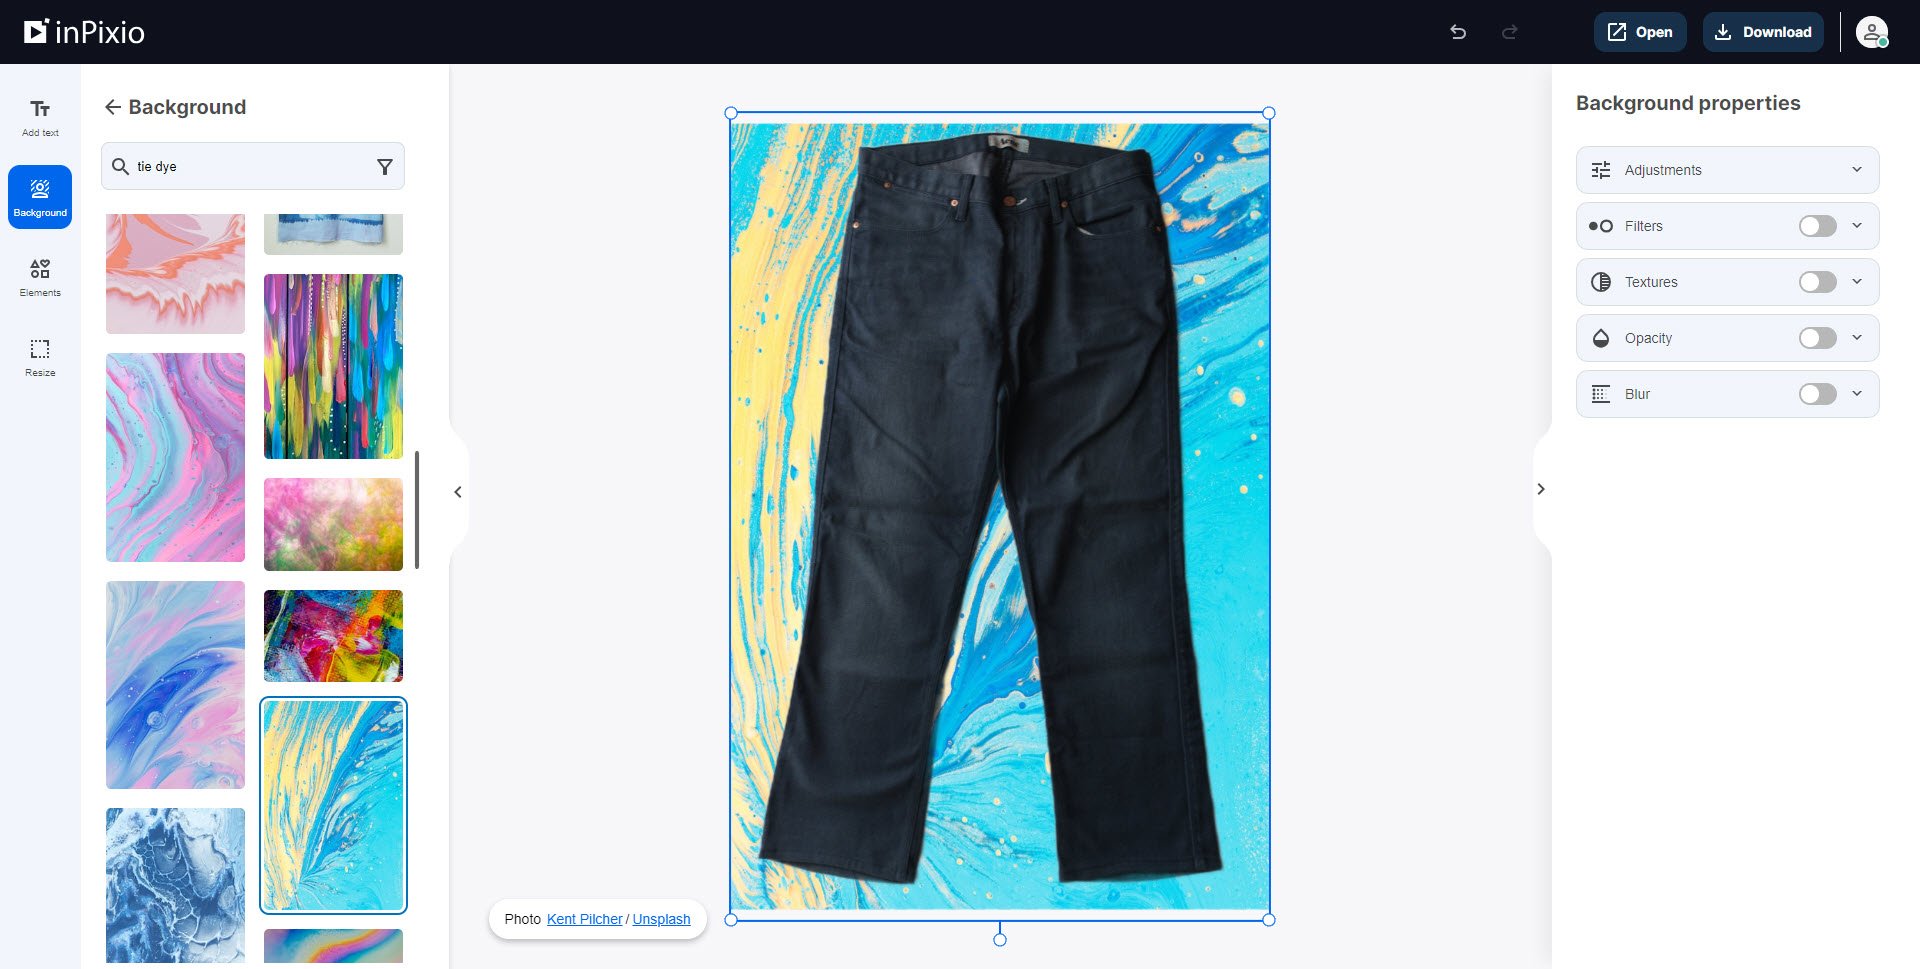 Pair of jeans with tie dye background